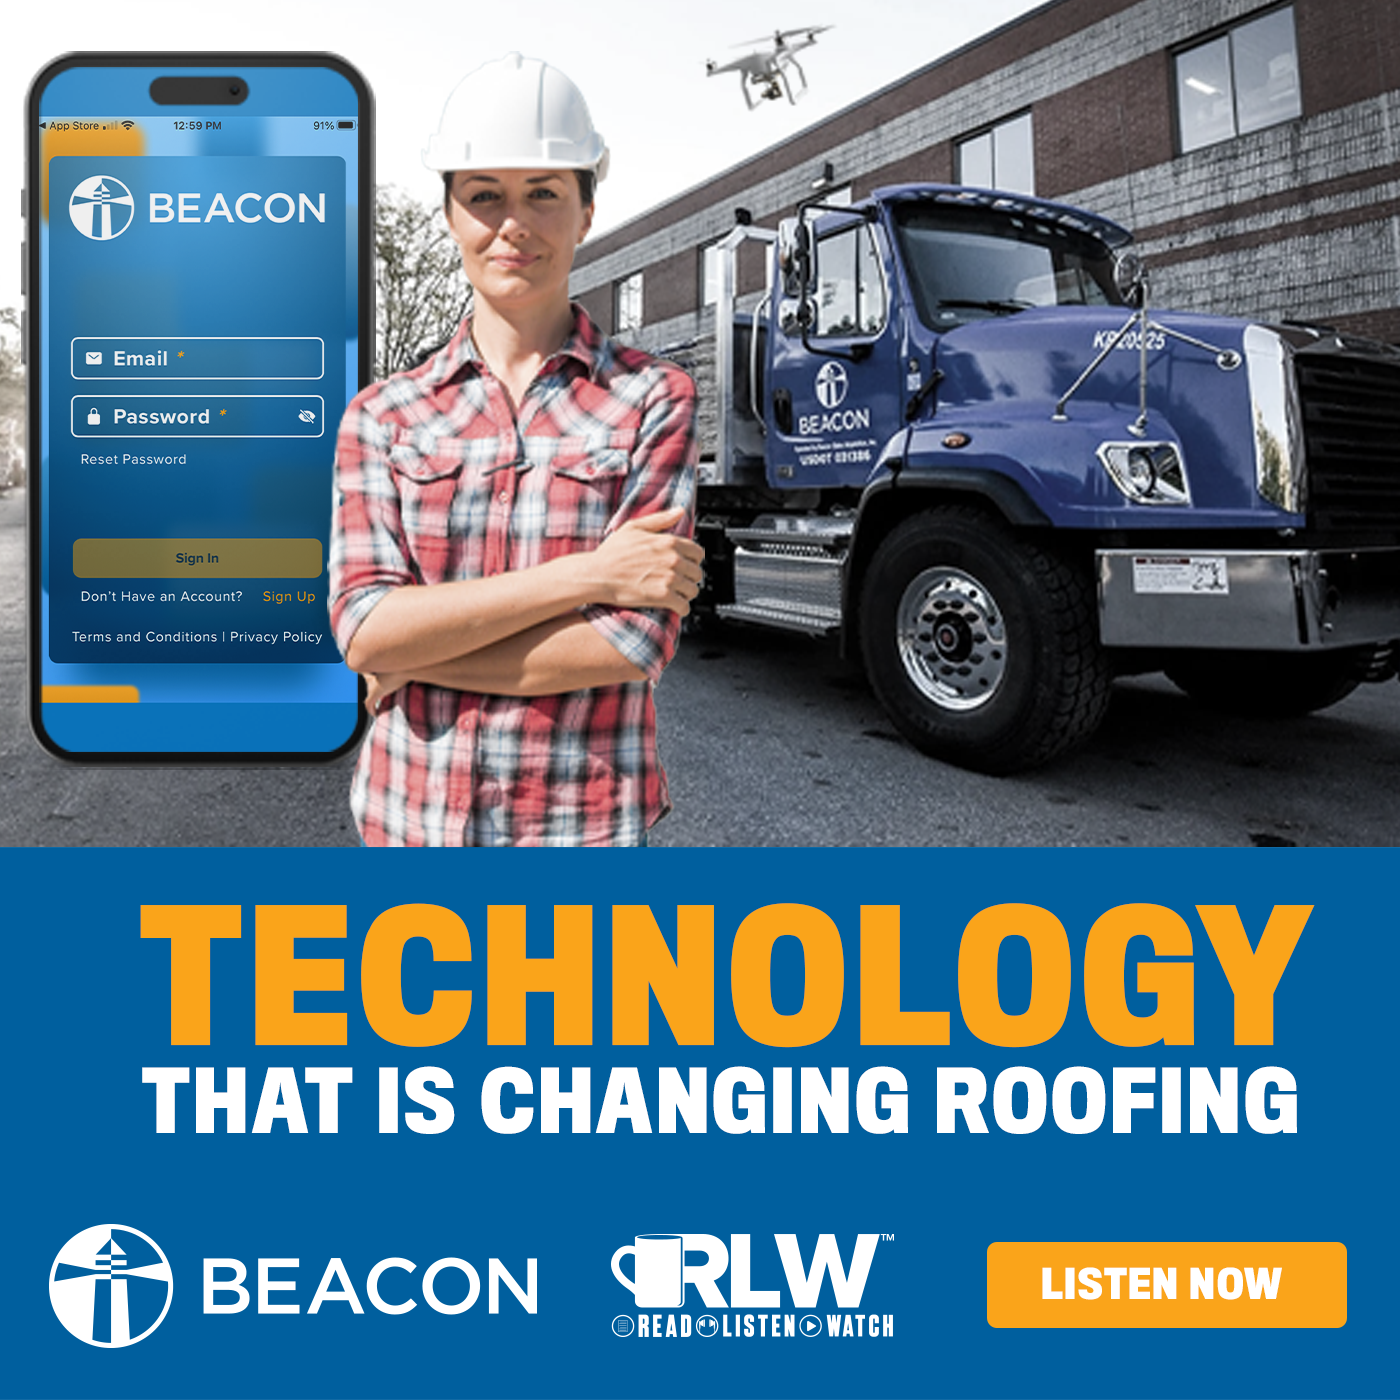 Beacon - Technology That is Changing Roofing - Pod